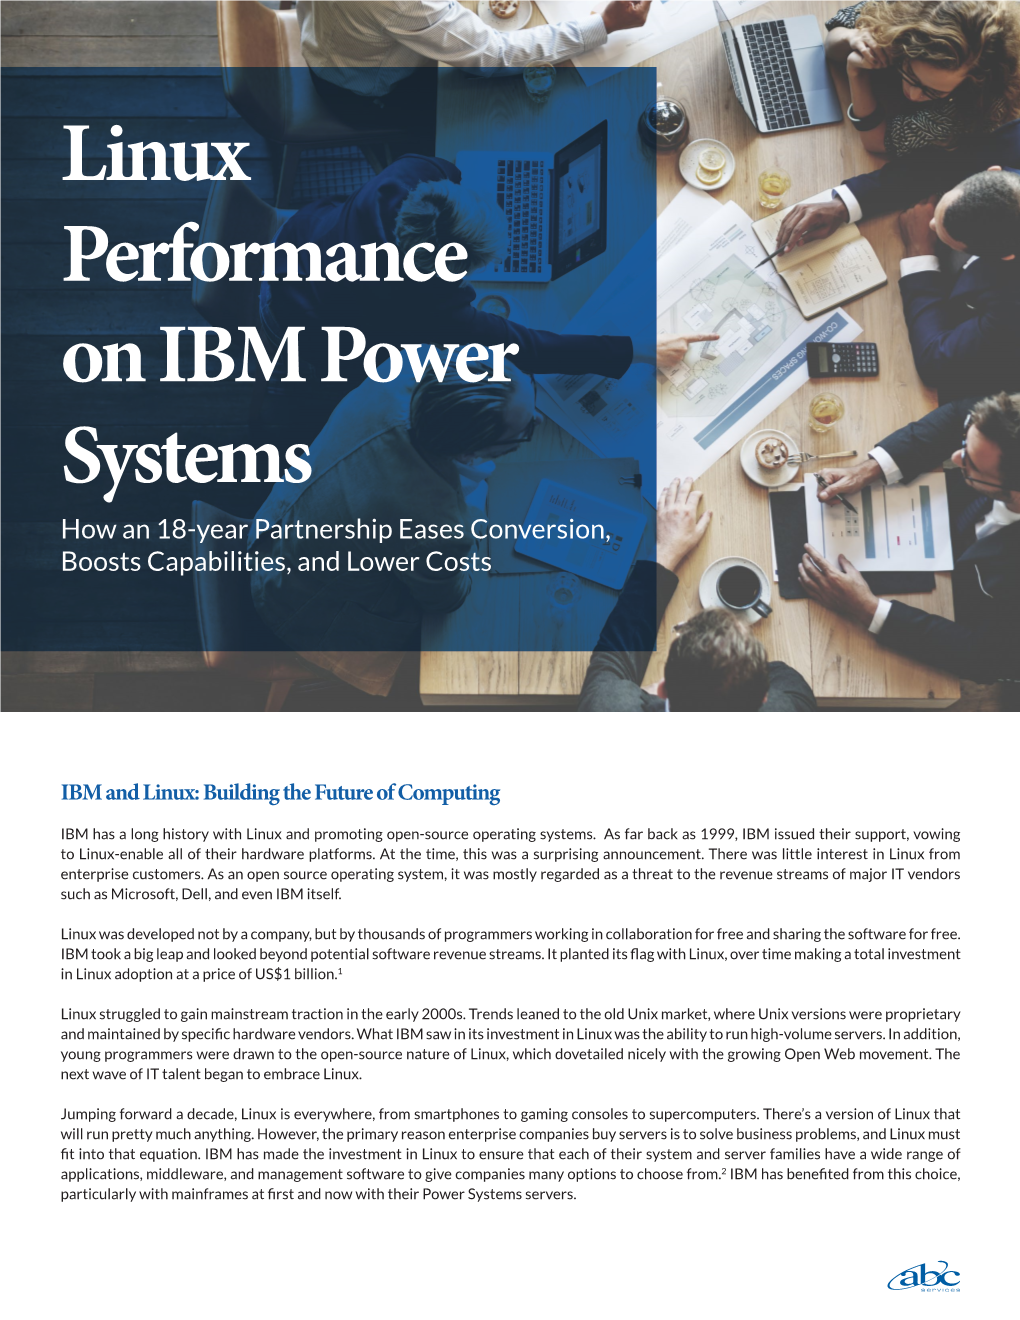 Linux Performance on IBM Power Systems How an 18-Year Partnership Eases Conversion, Boosts Capabilities, and Lower Costs